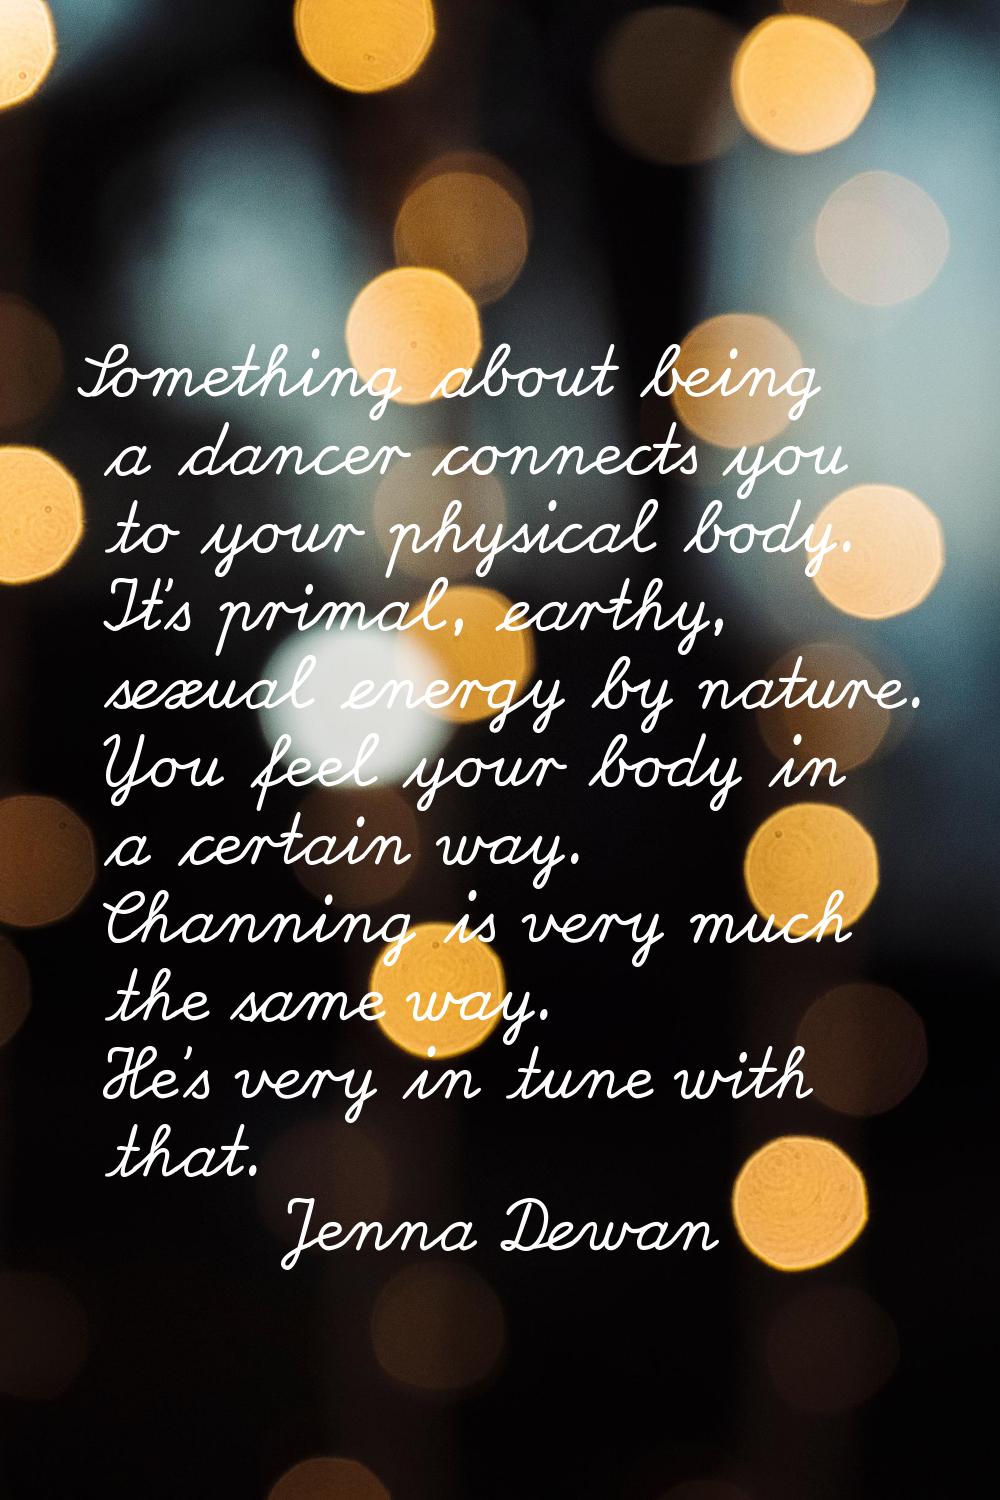 Something about being a dancer connects you to your physical body. It's primal, earthy, sexual ener